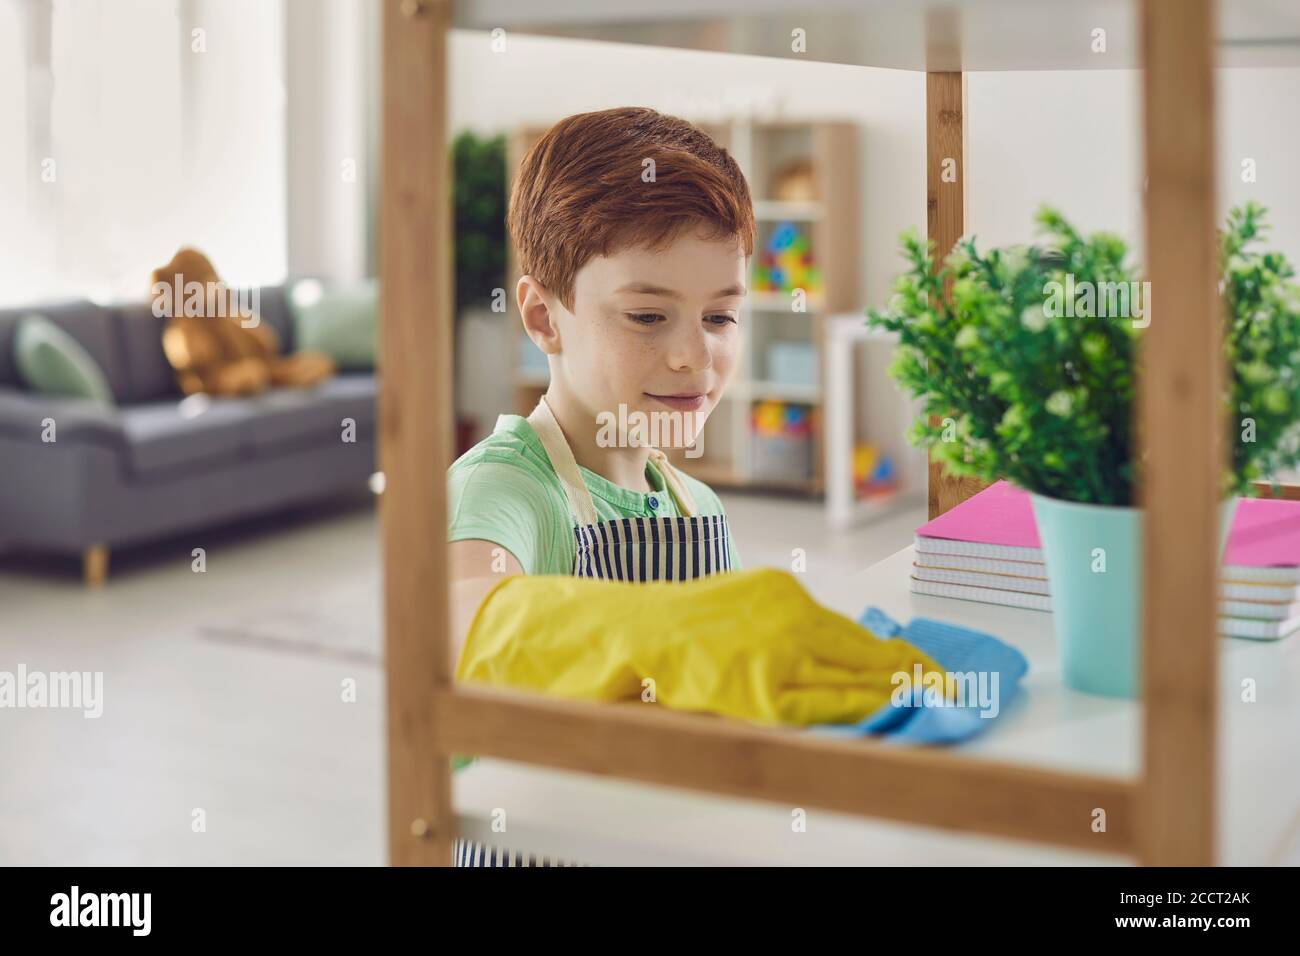 Smiling boy making cleaning and dusting off shelves surfaces at home Stock Photo